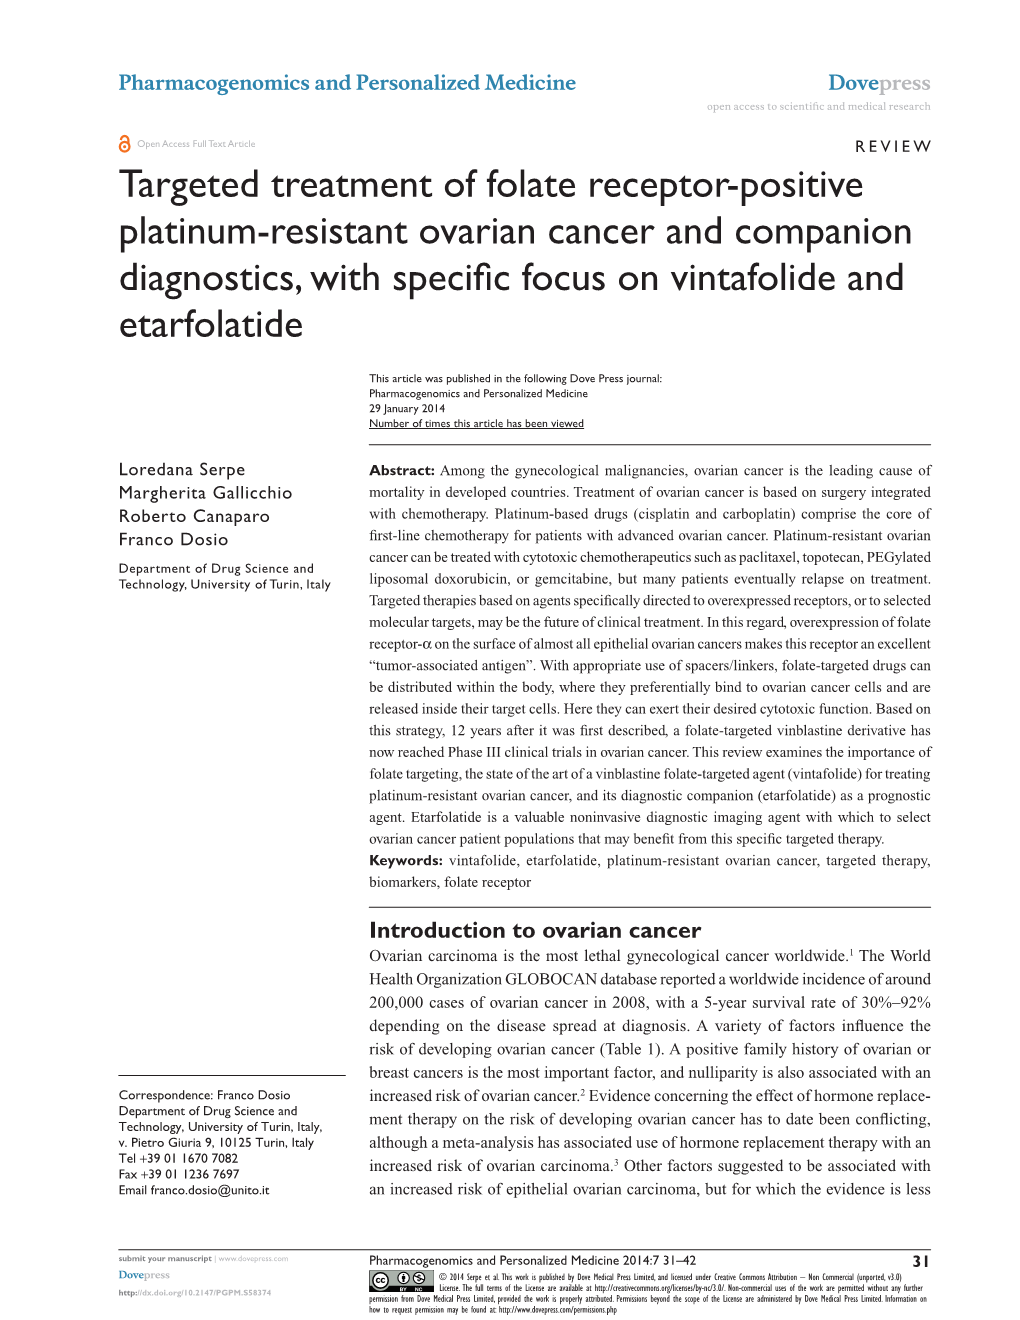 Targeted Treatment of Folate Receptor-Positive Platinum-Resistant Ovarian Cancer and Companion Diagnostics, with Specific Focus on Vintafolide and Etarfolatide